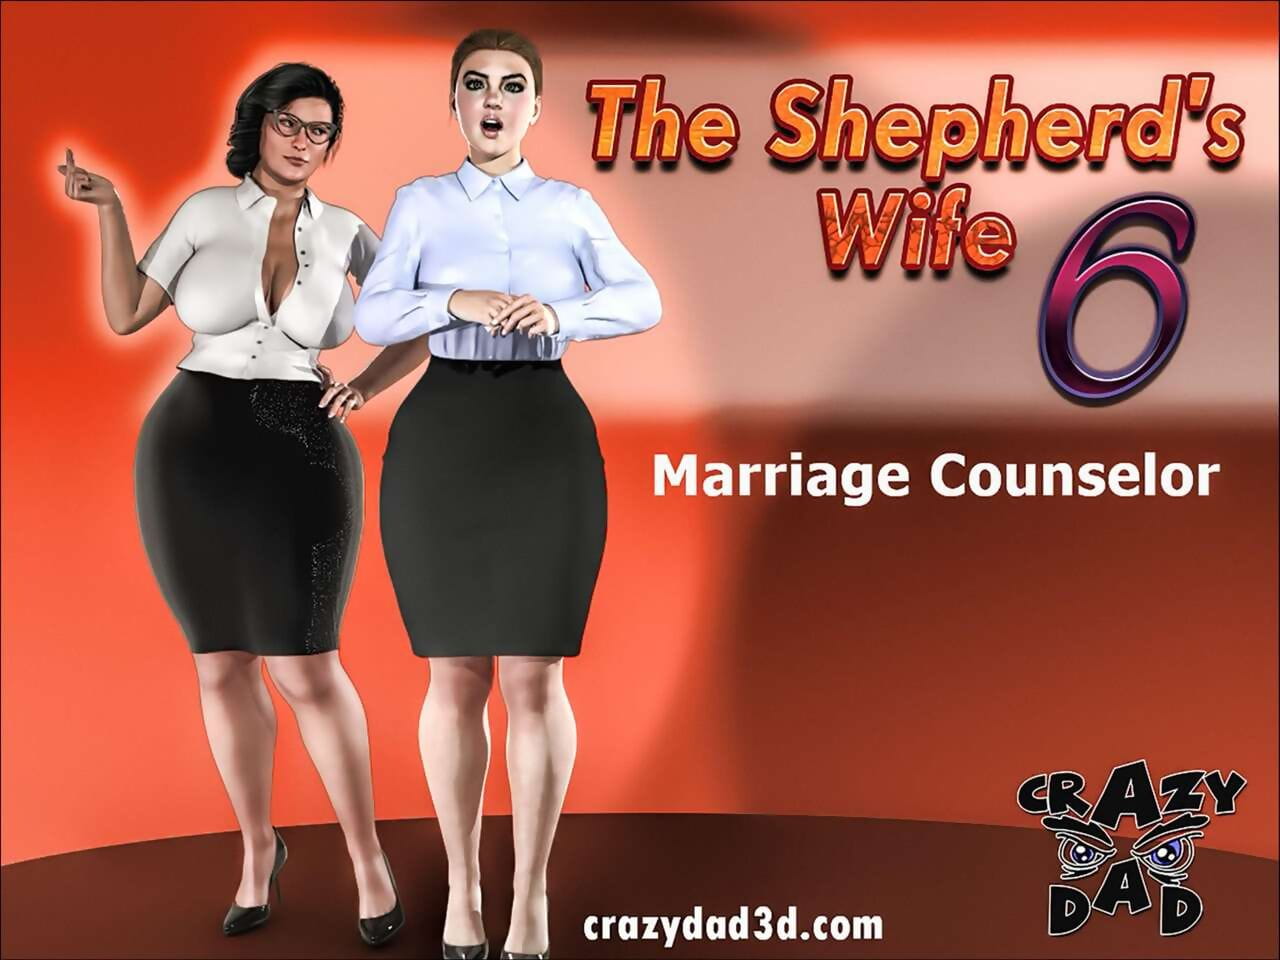 Crazy Dad The Shepherds Wife 6: Marriage Counselor page 1